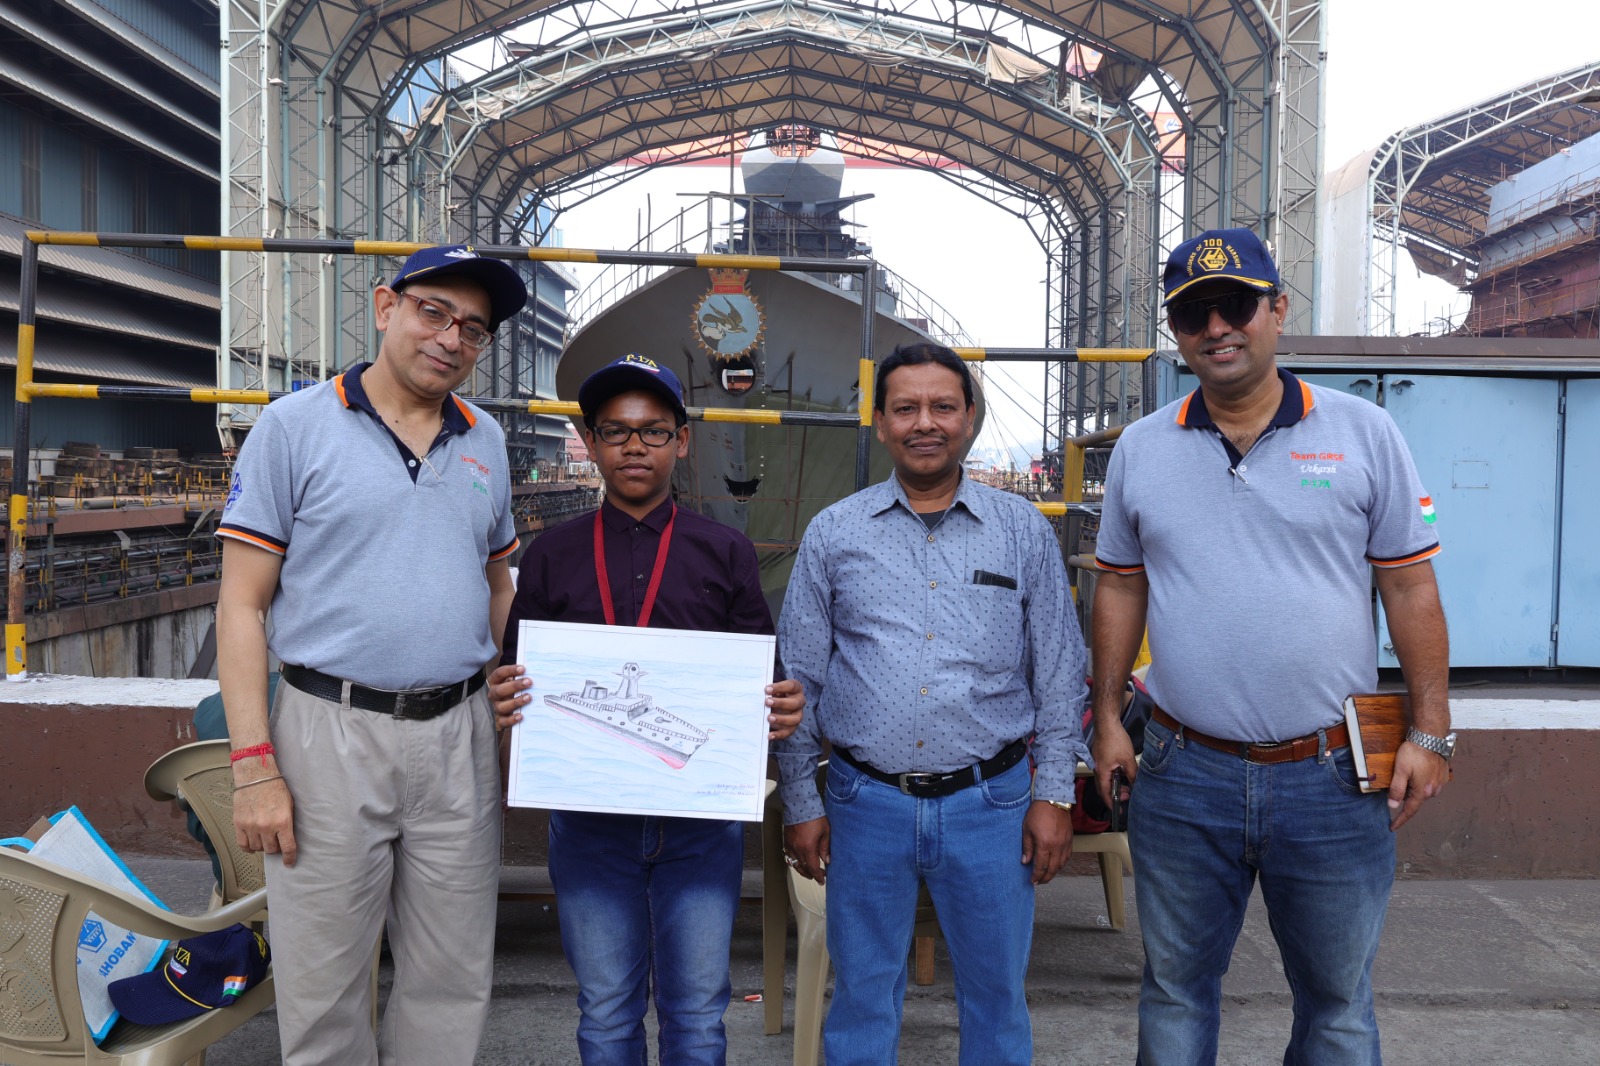 Painting & Drawing of P-17A Advanced Frigate by Employees Children on 18 Feb 23